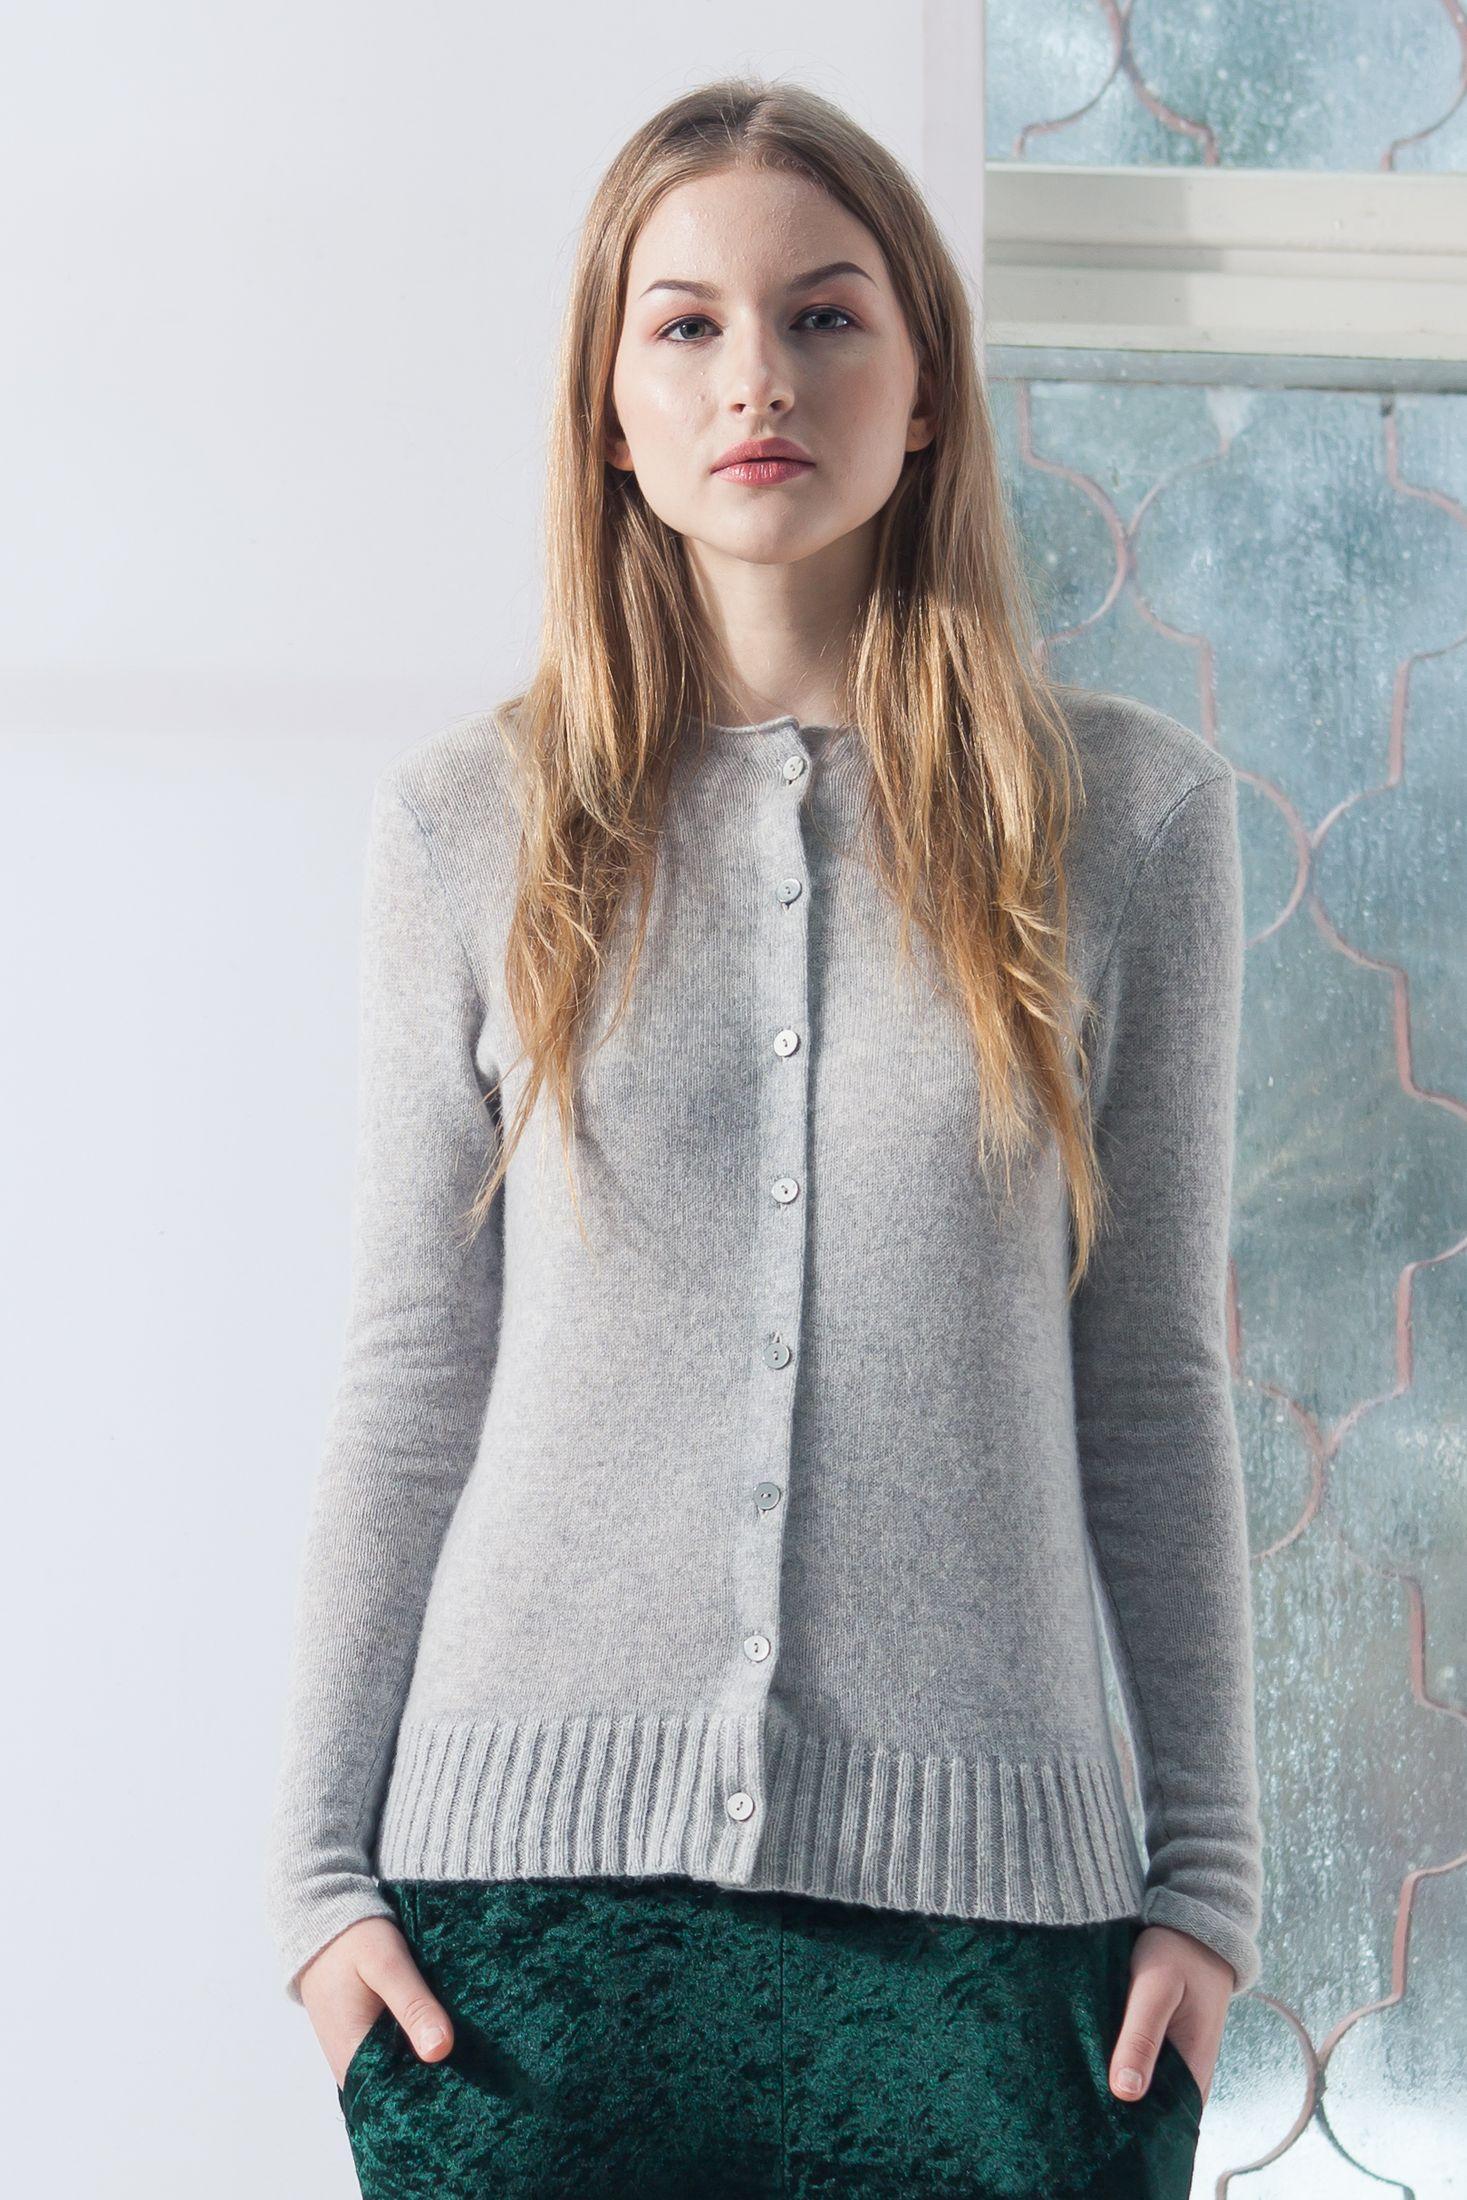 Shop HELEN, the grey cashmere button-down cardigan by Krista Elsta, a versatile piece that combines comfort and sophistication effortlessly.